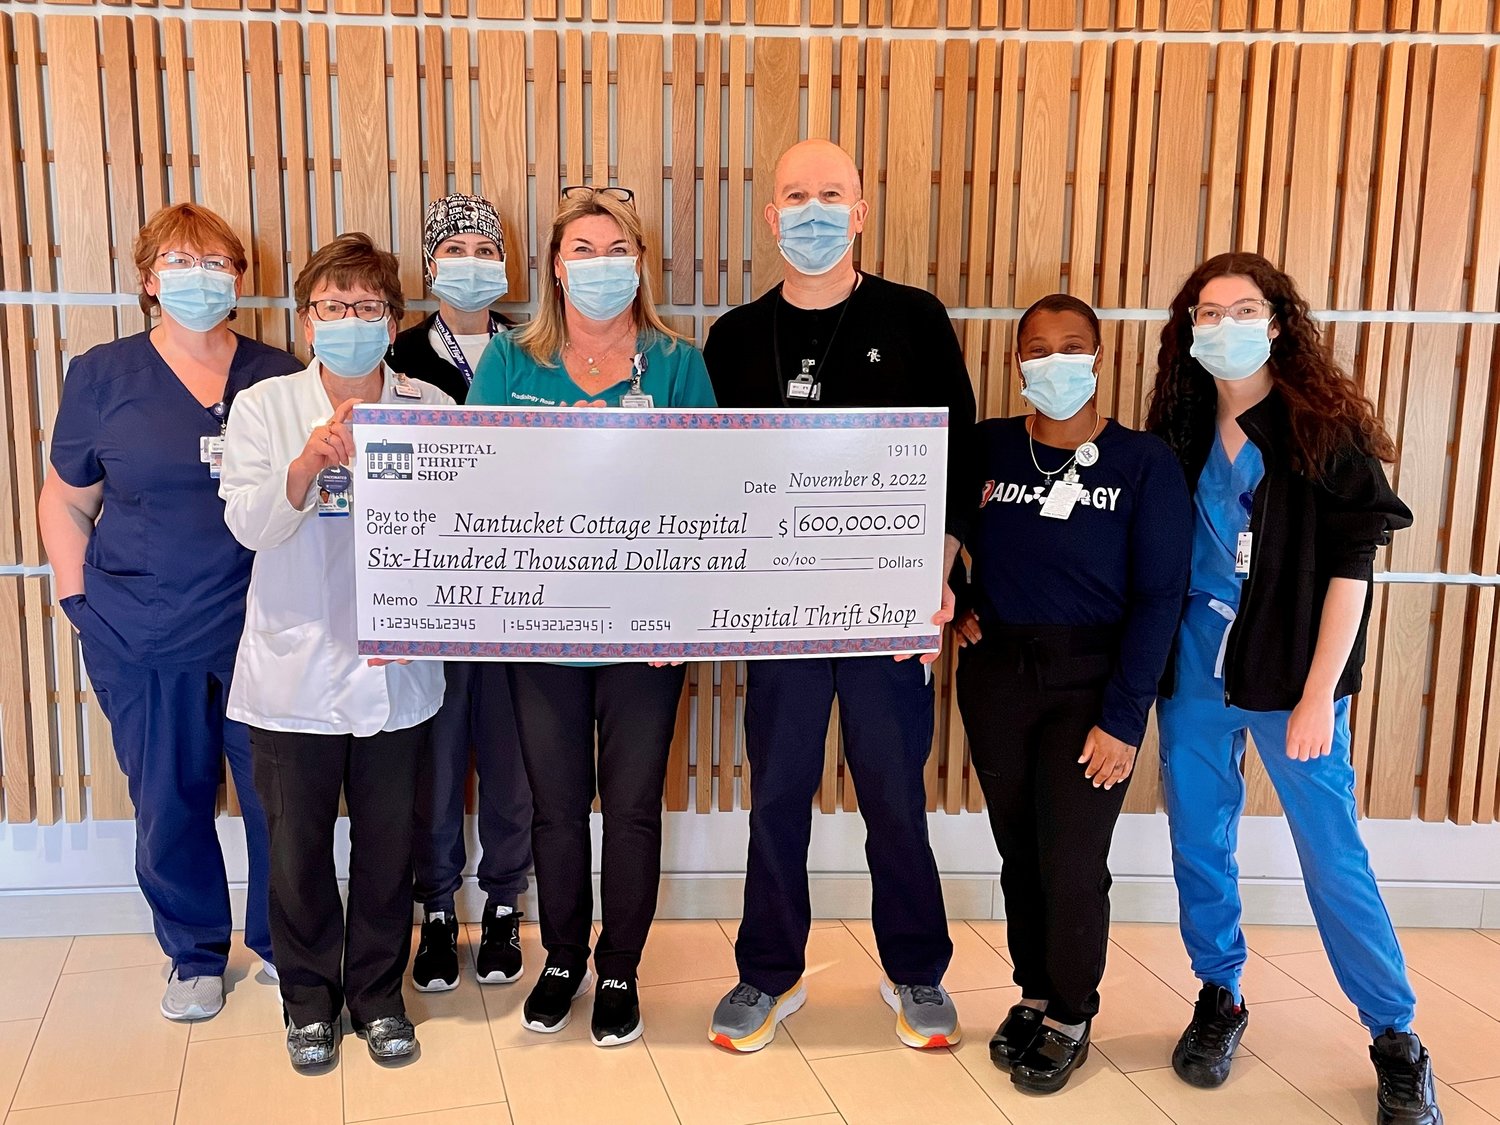 The Hospital Thrift Shop donated $600,000 to Nantucket Cottage Hospital Tuesday.